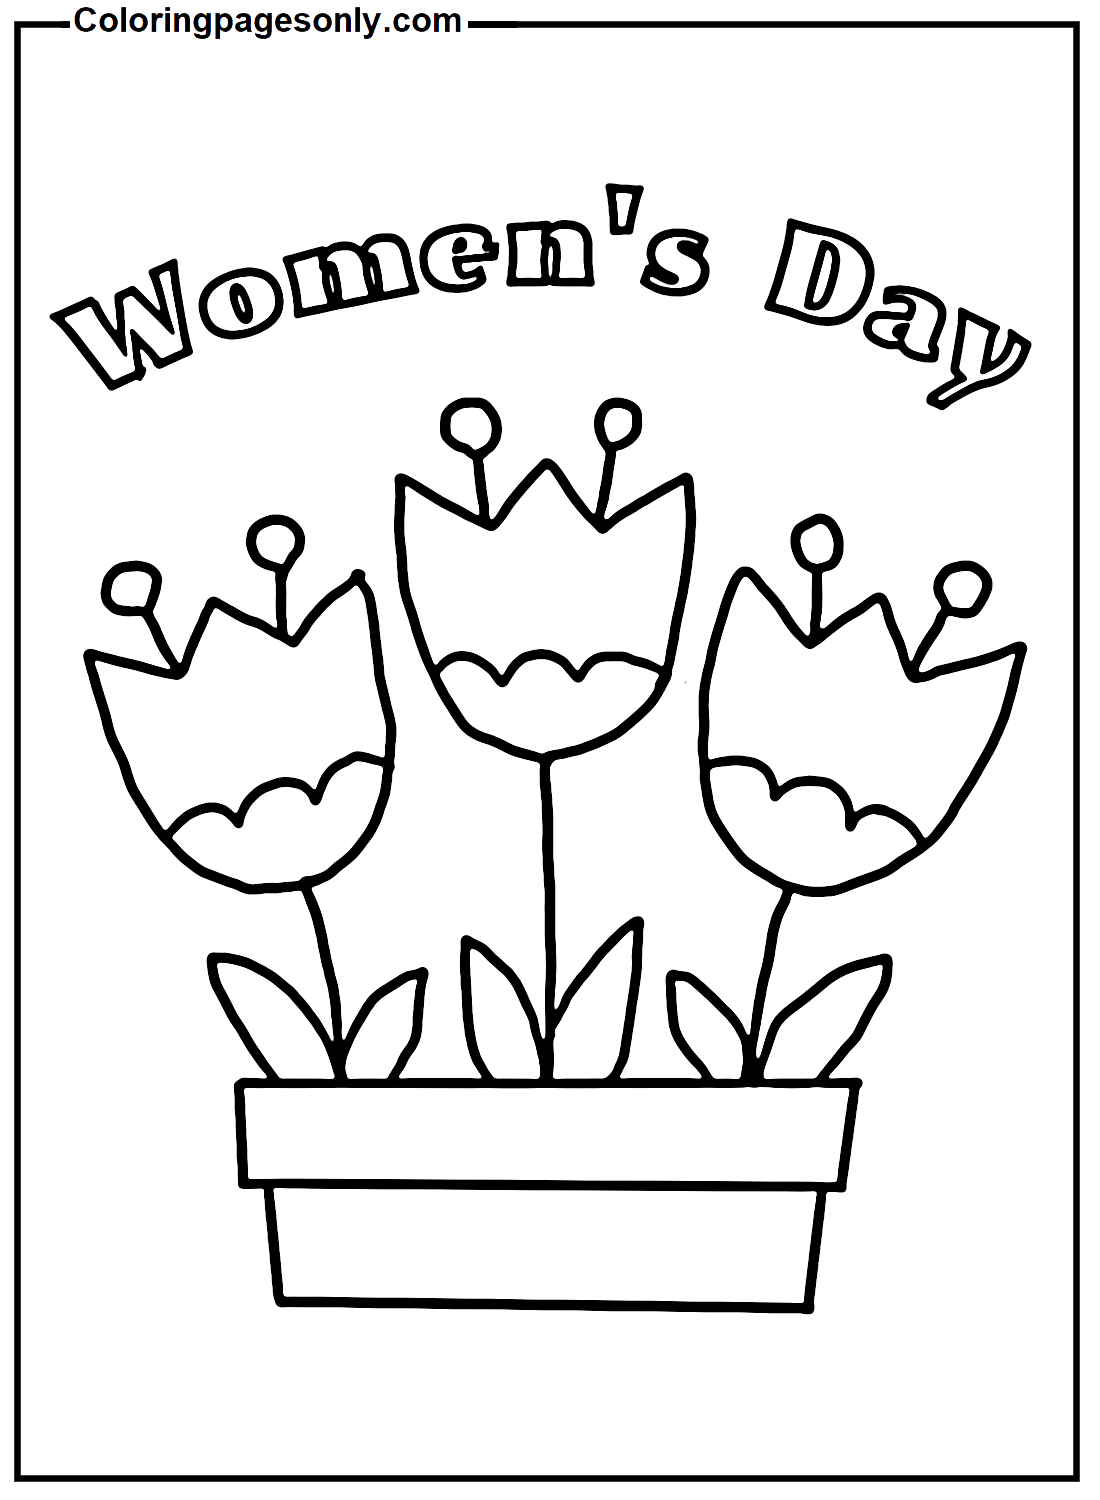 Women’s Day Image Coloring Page